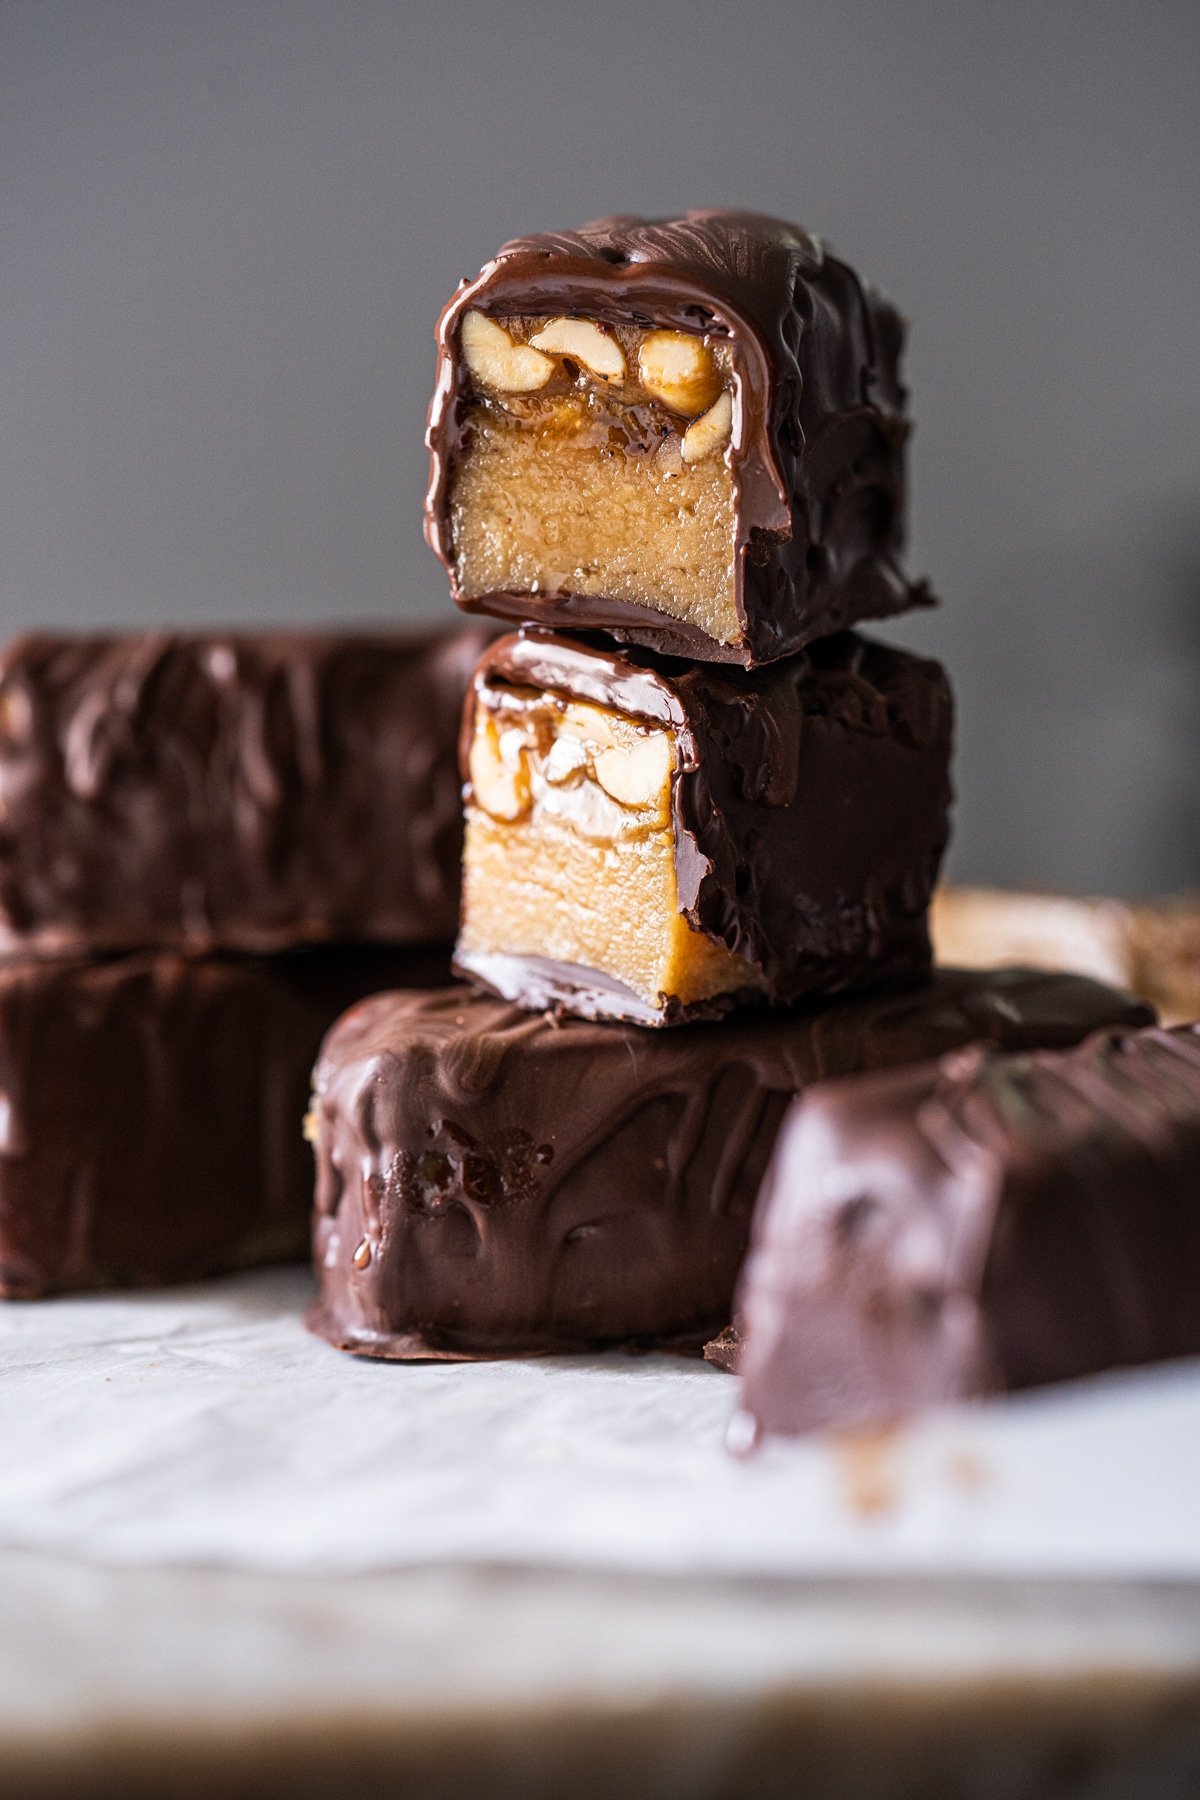 Stacked keto snickers bars to show the caramel and nougat layers